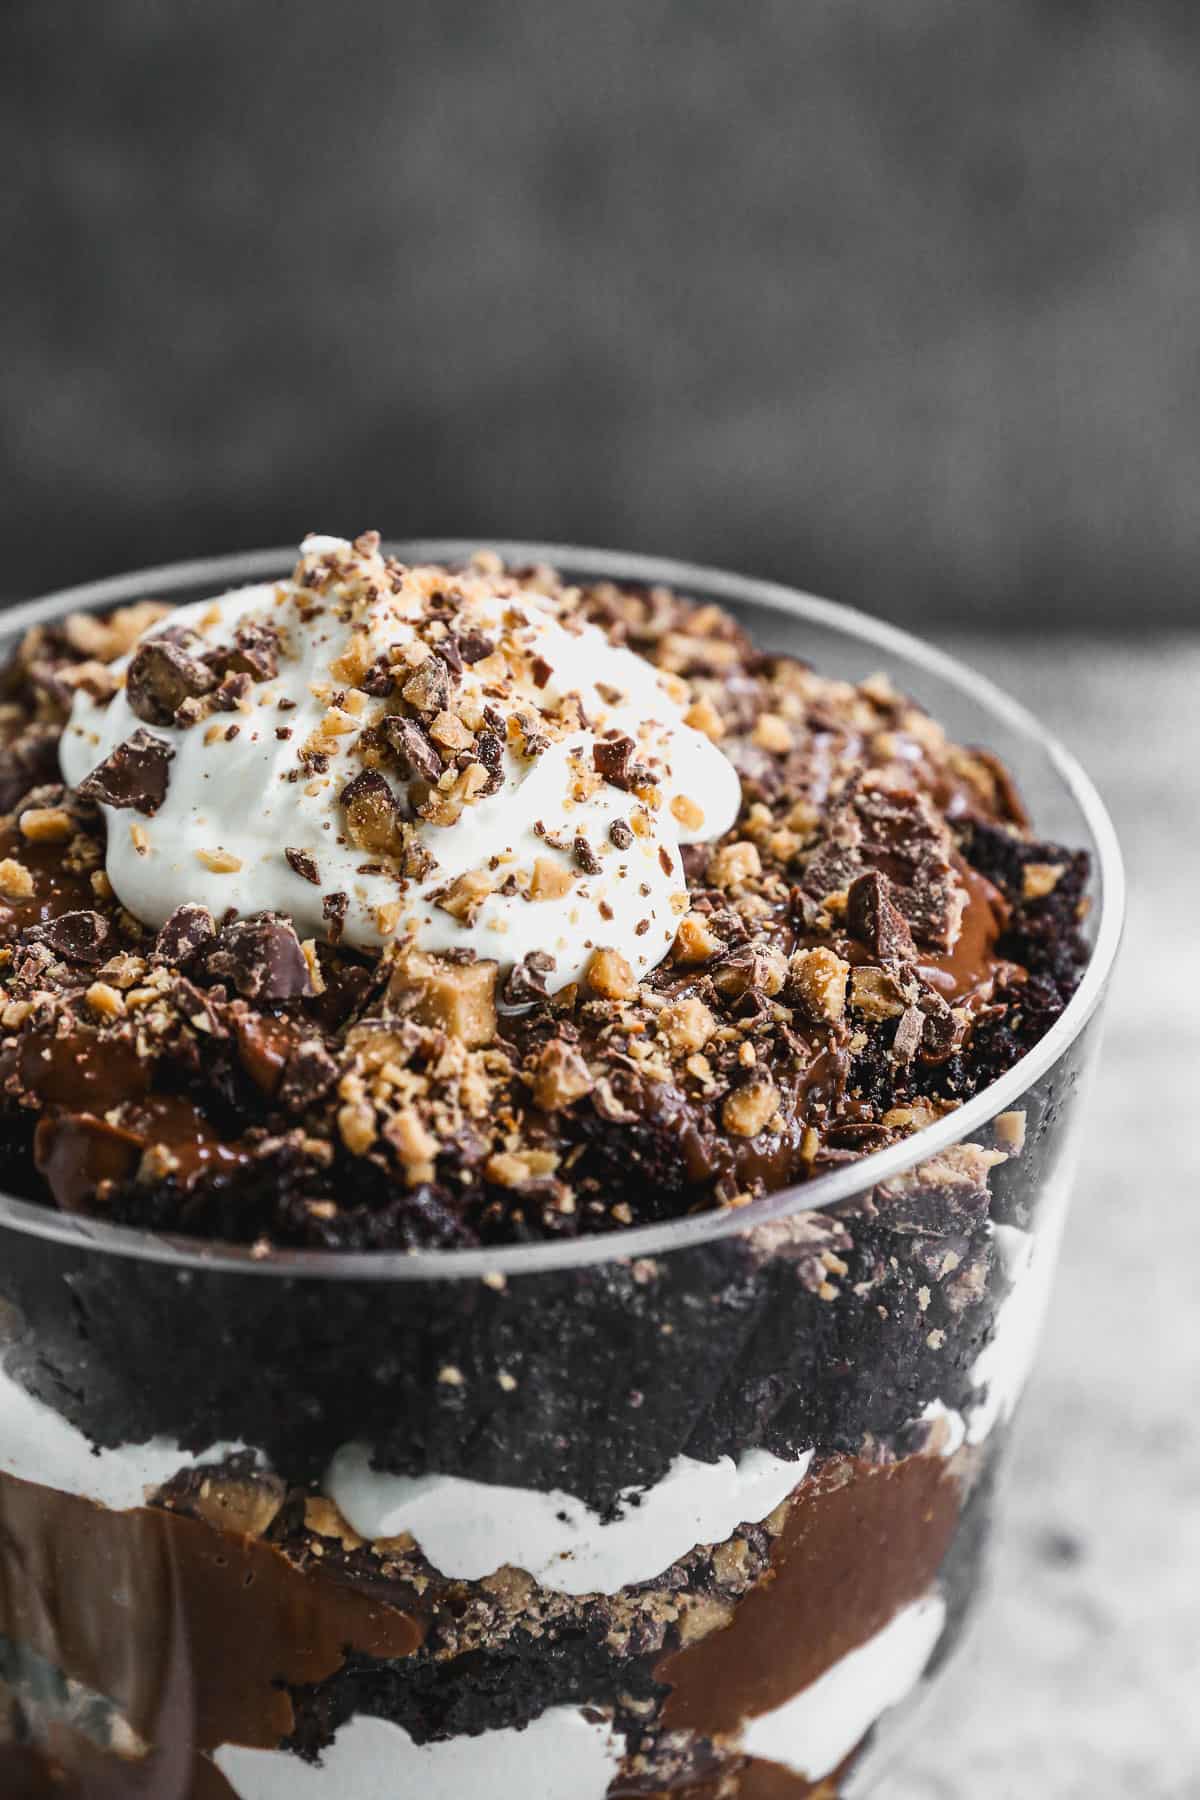 A close up image of a simple chocolate trifle recipe, topped with whipped cream and crushed heath bars.